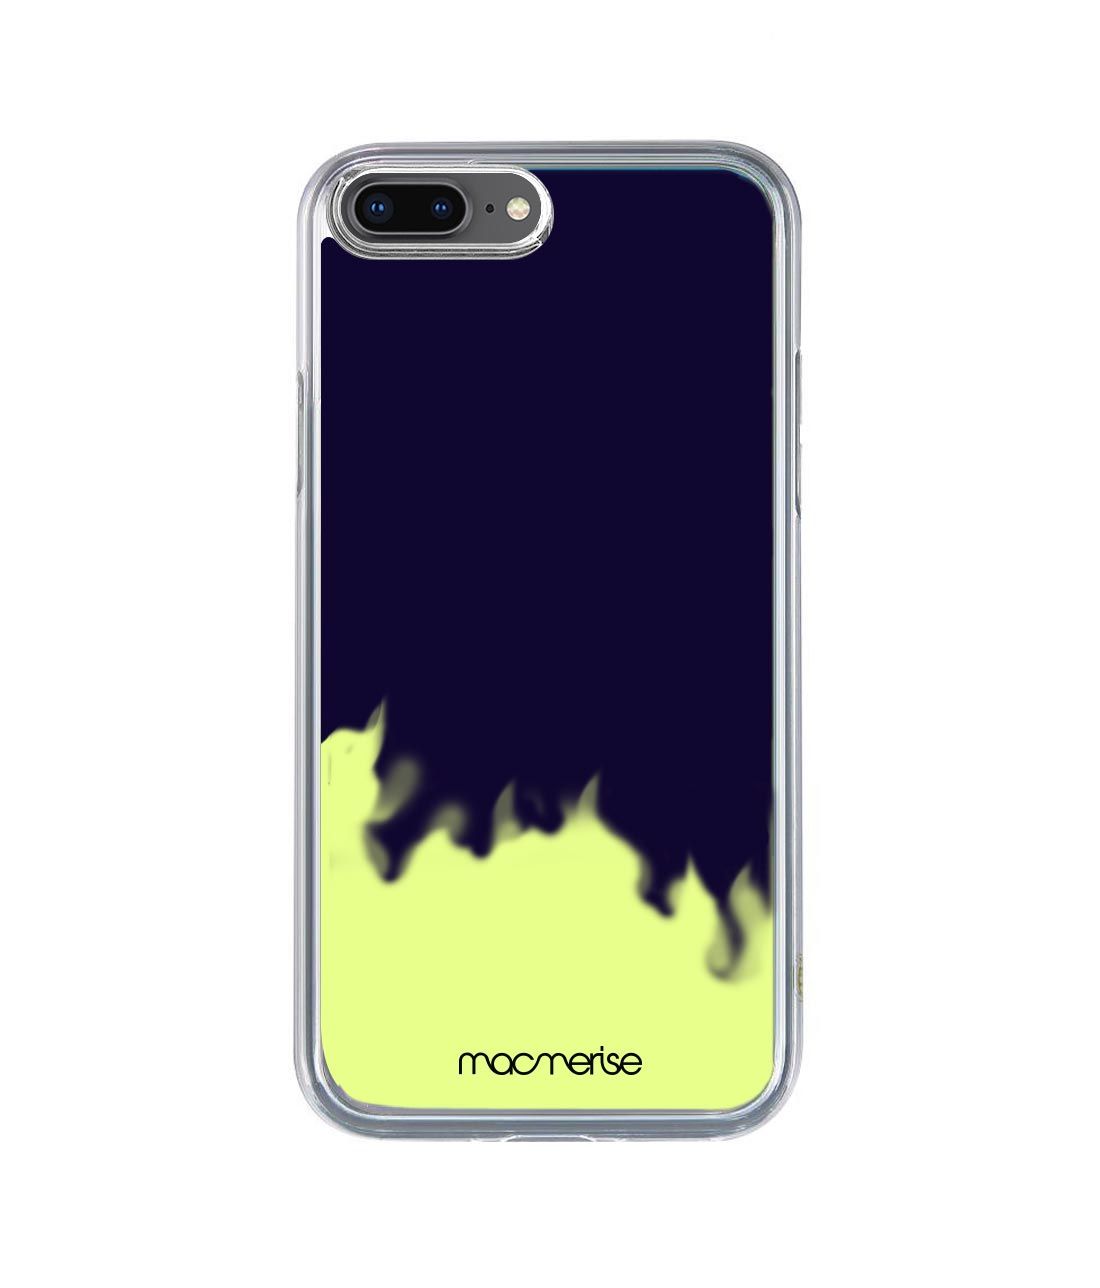 Neon Sand Blue - Neon Sand Phone Case for iPhone 8 Plus